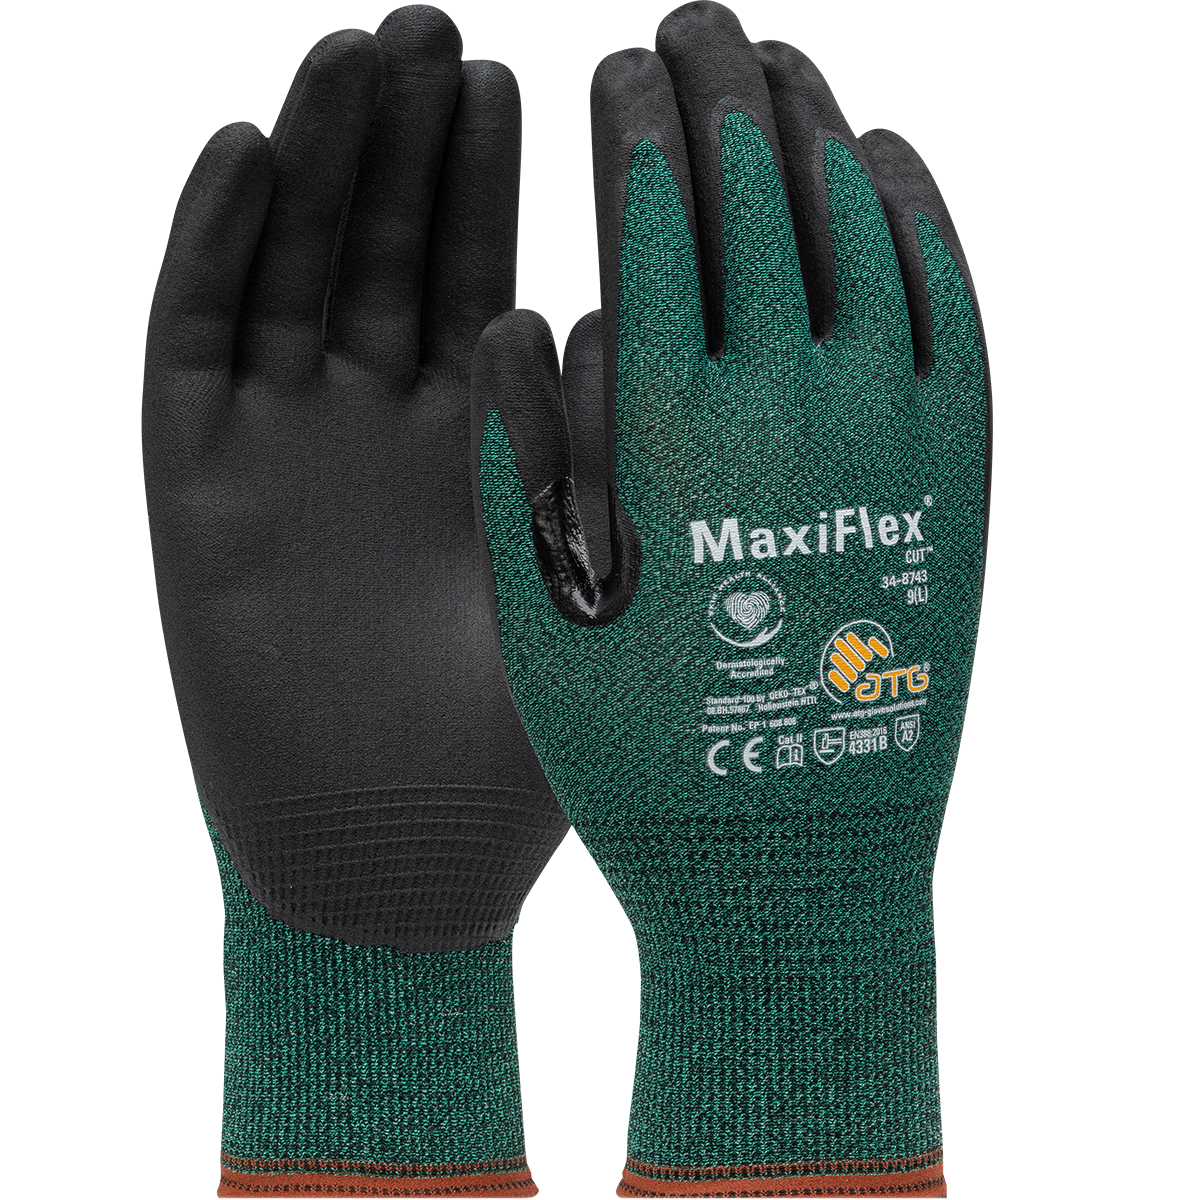 PIP MaxiFlex Seamless Knit Nitrile Coated Palm Gloves